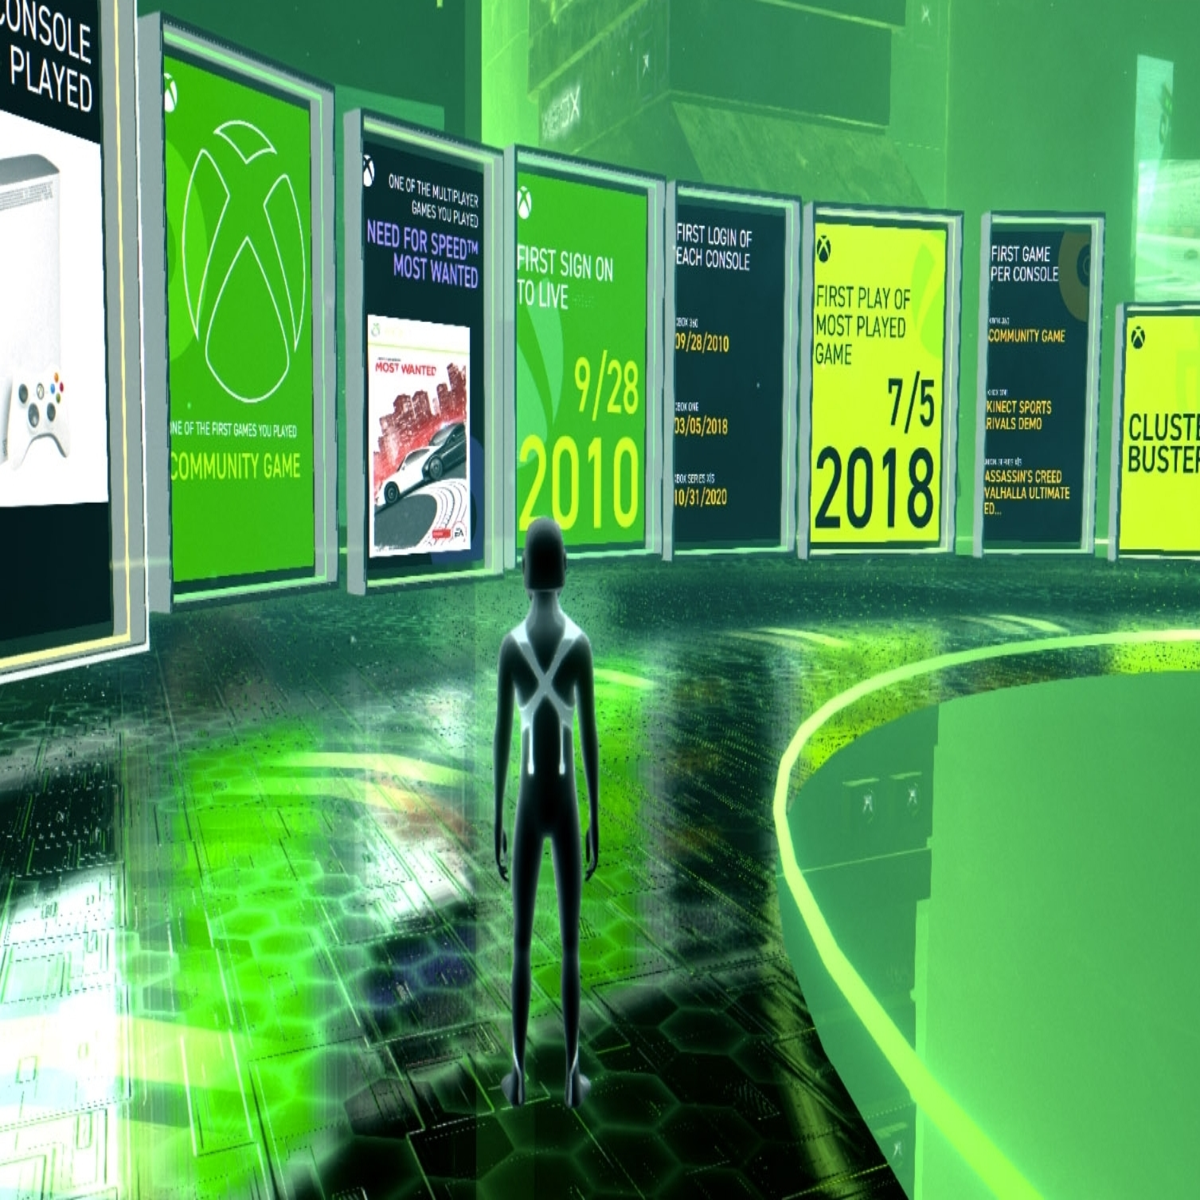 Xbox 20th anniversary: Looking back on introduction of gaming